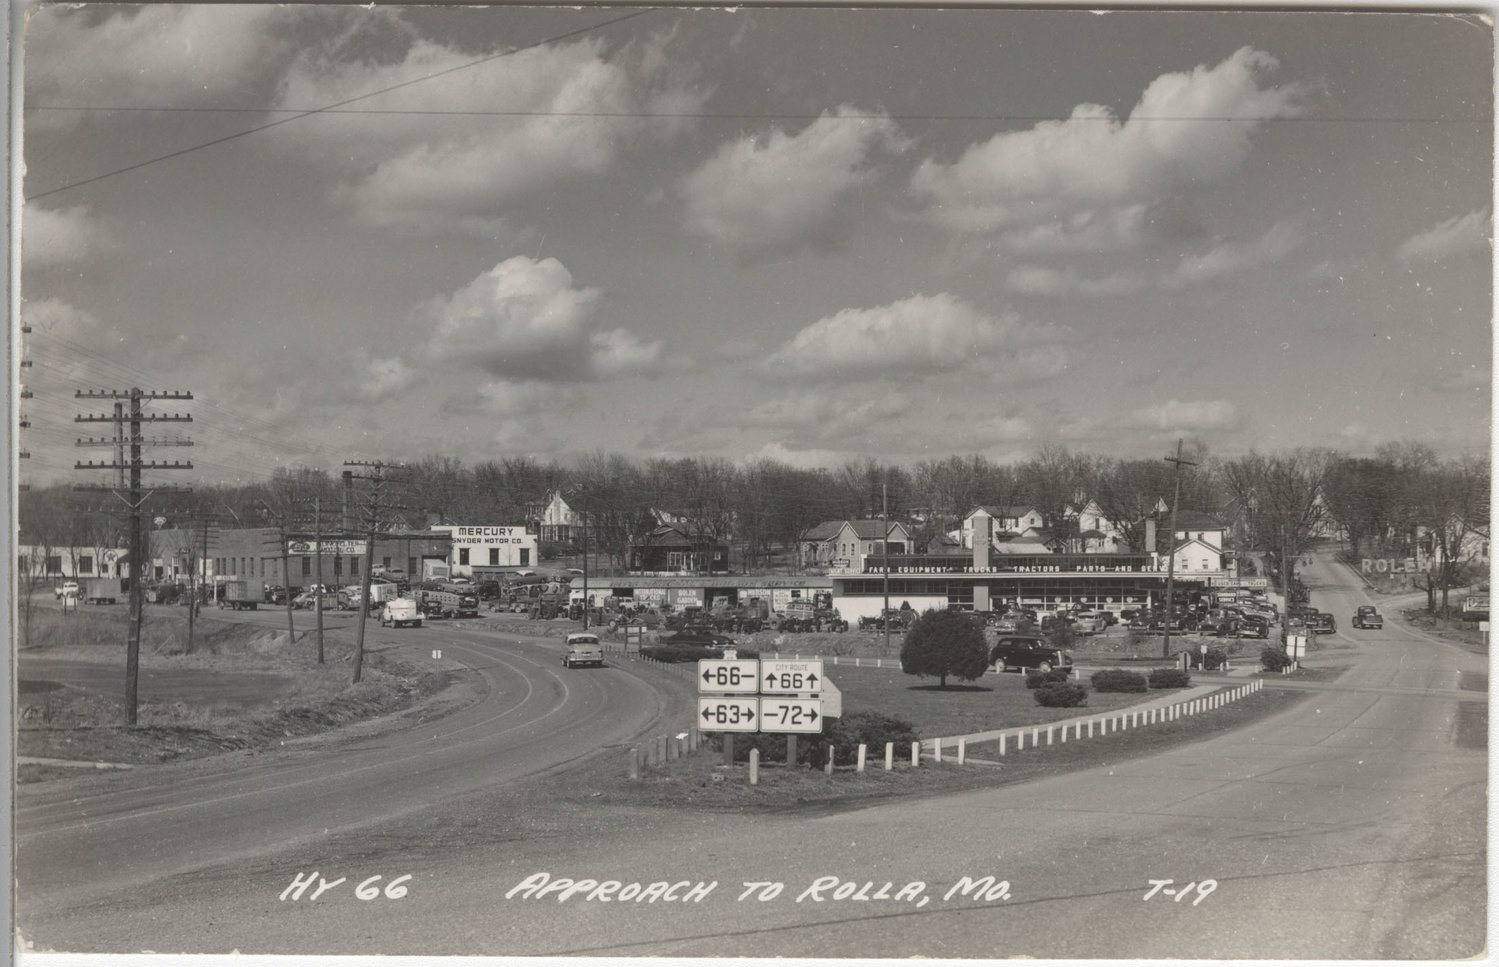 Intersection of U.S. Highway 66 and Route 19, Rolla, circa 1950s, State Historical Society of Missouri.